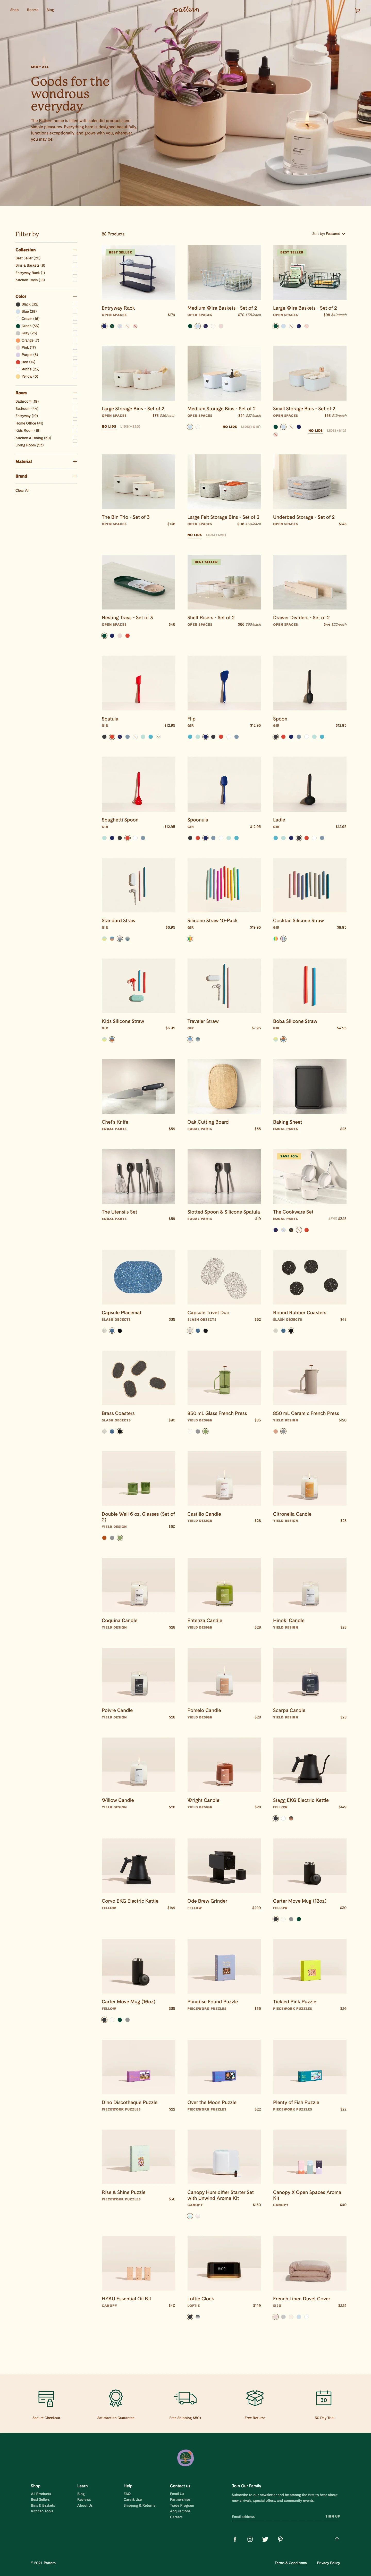 Pattern Brands Landing Page Example: Pattern is a family of brands designed to help you enjoy daily life.